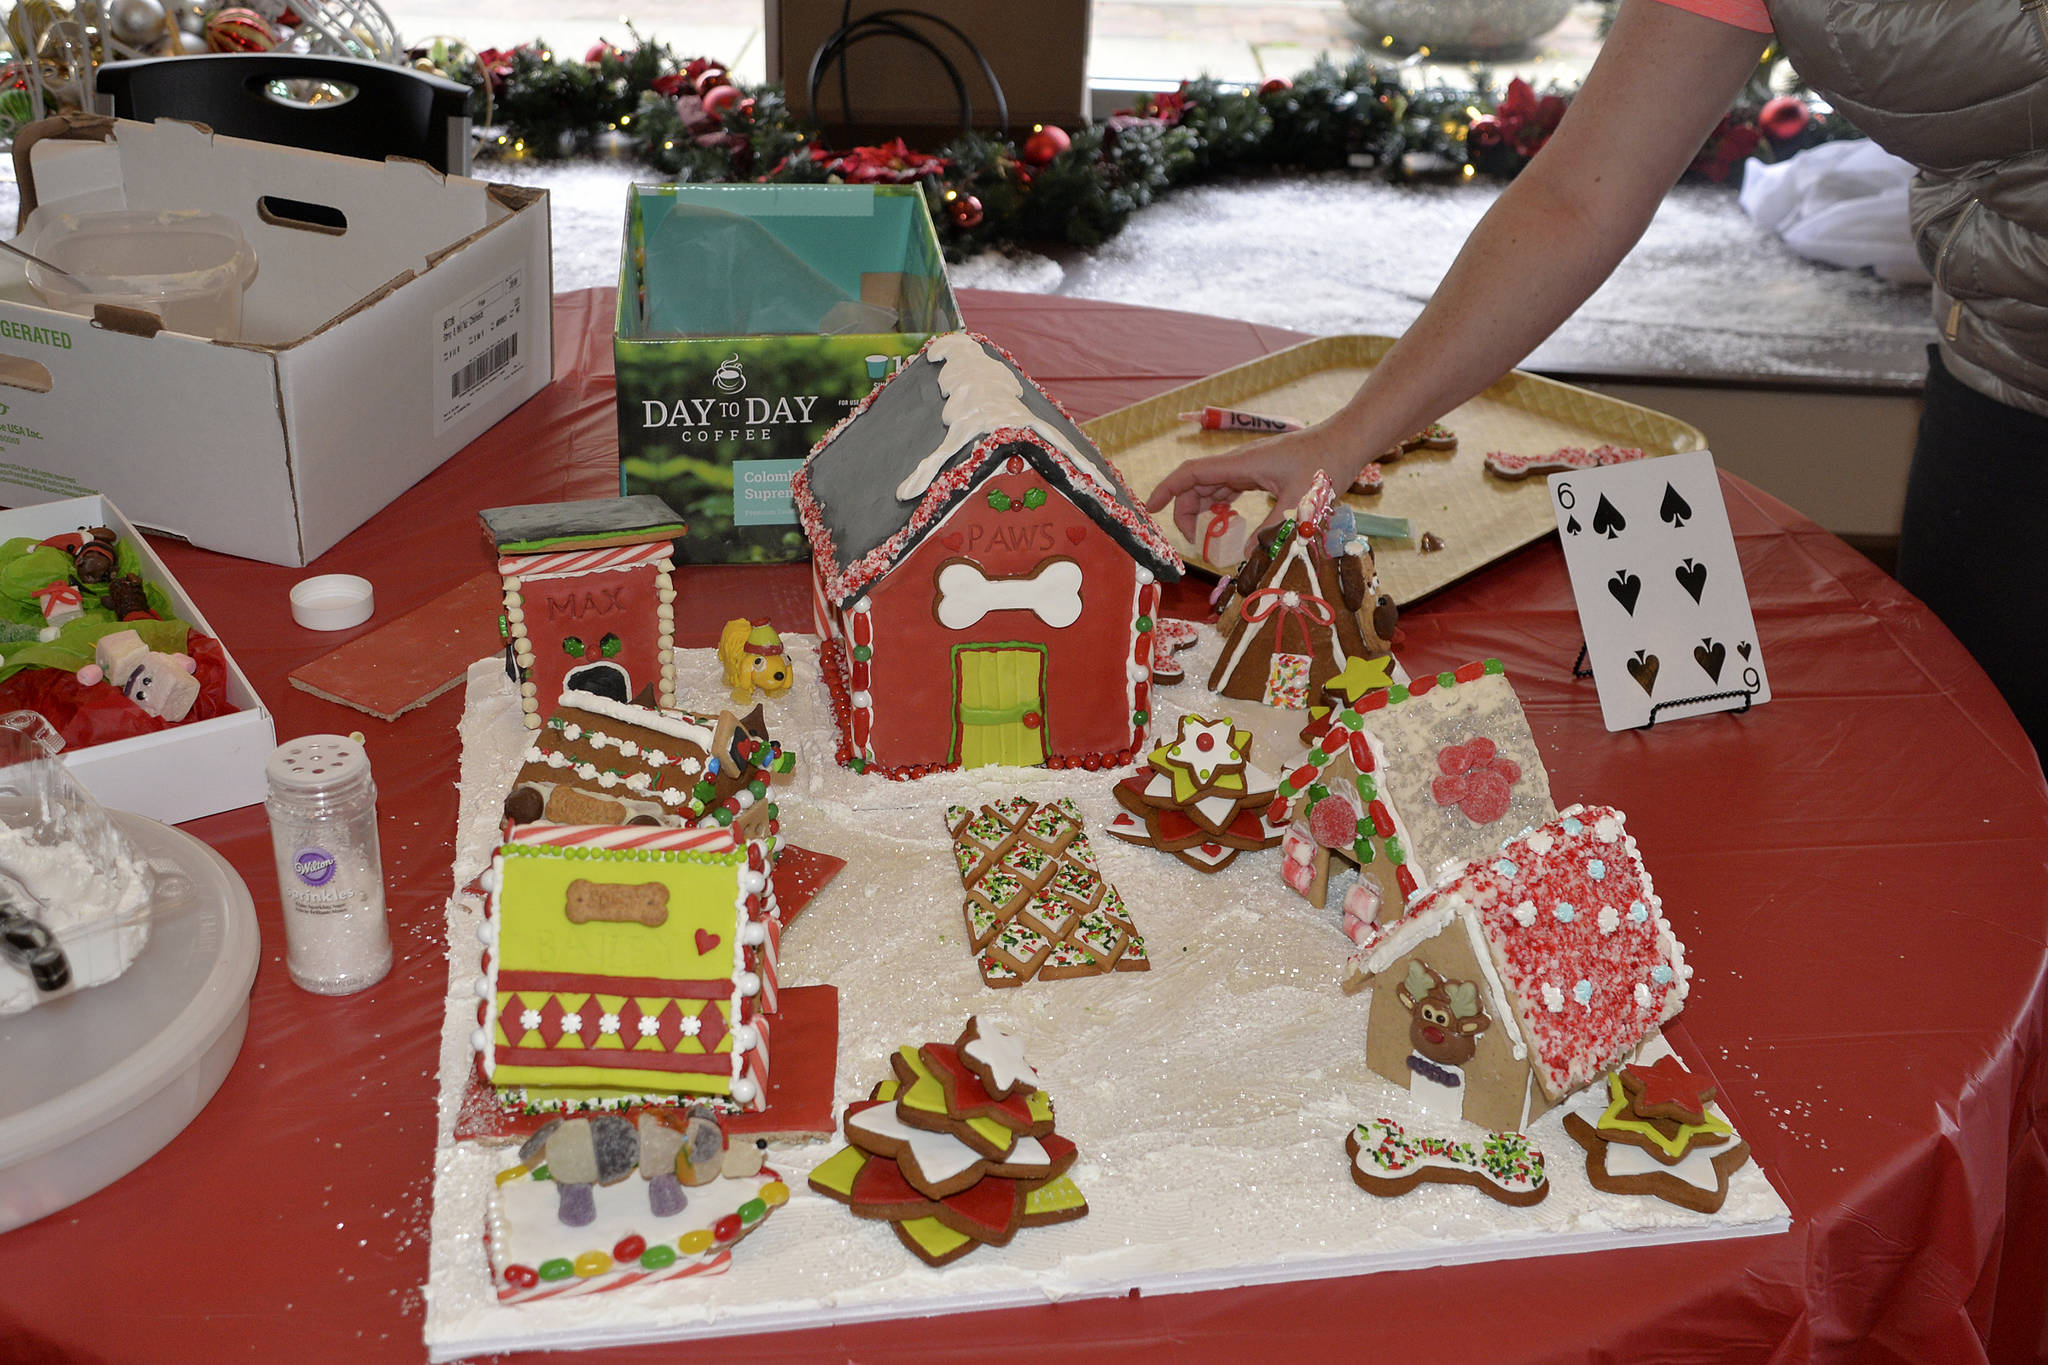 Gingerbread competition and other Saturday events